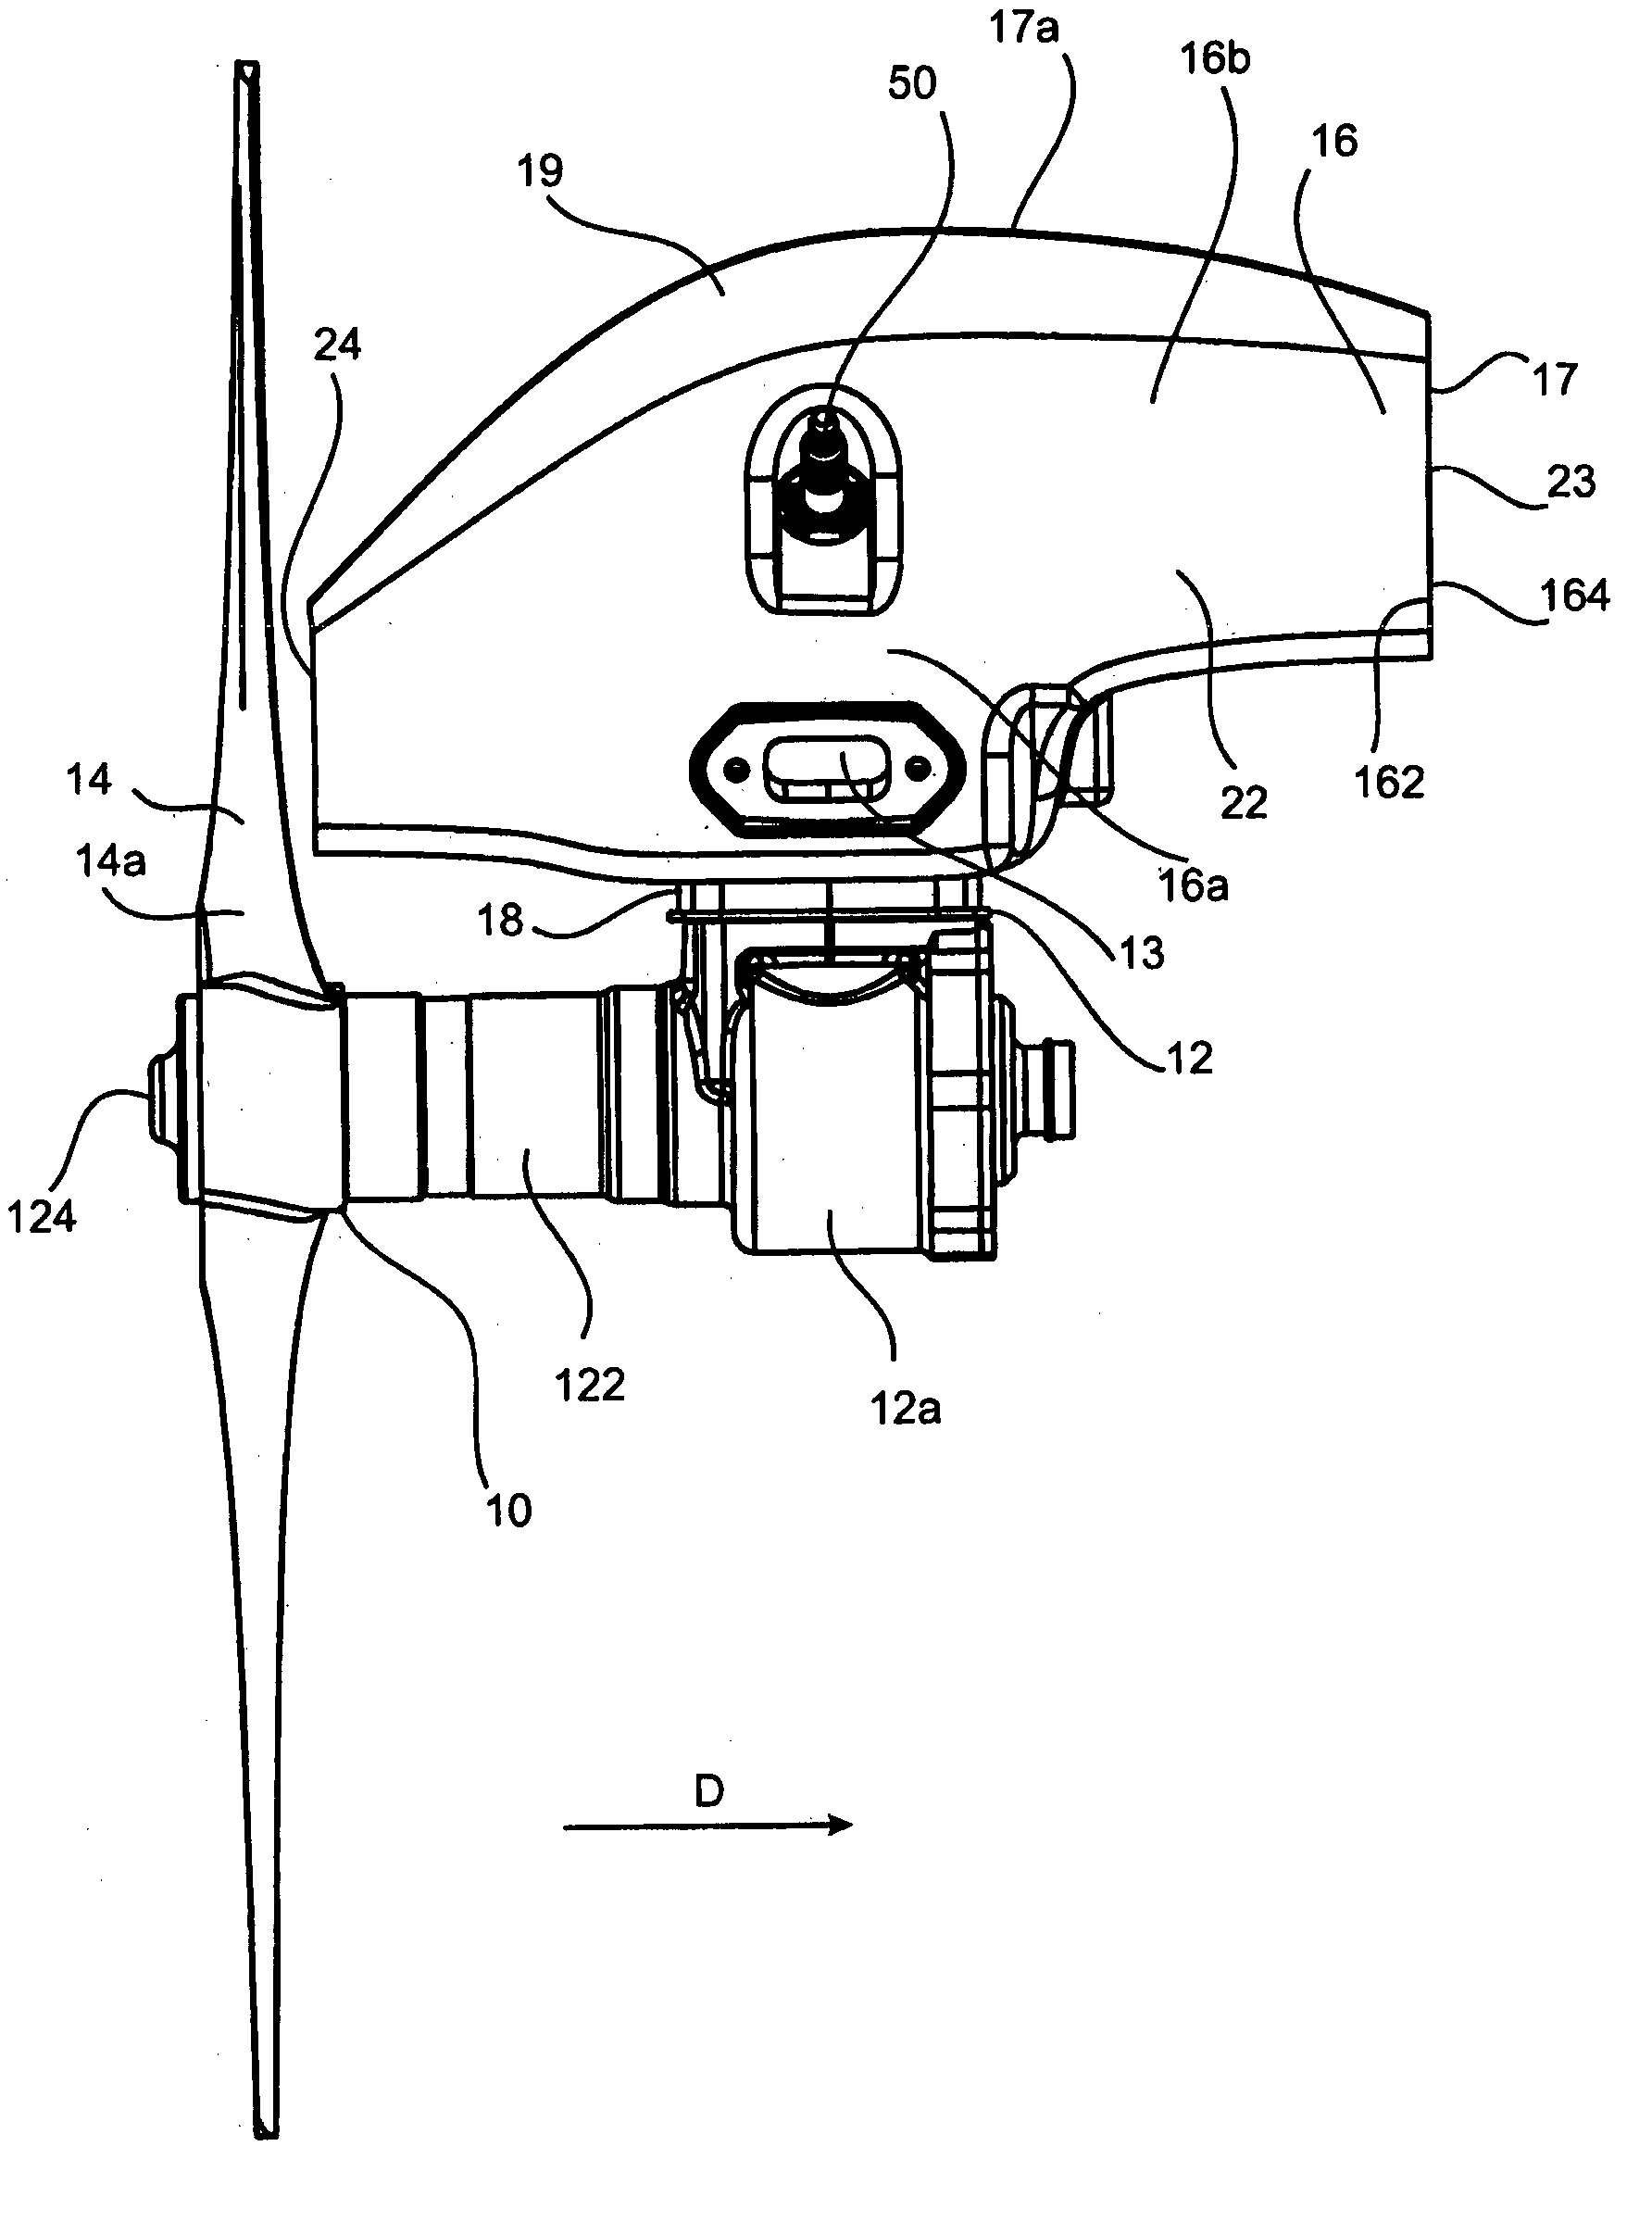 Air cooling system for an unmanned aerial vehicle